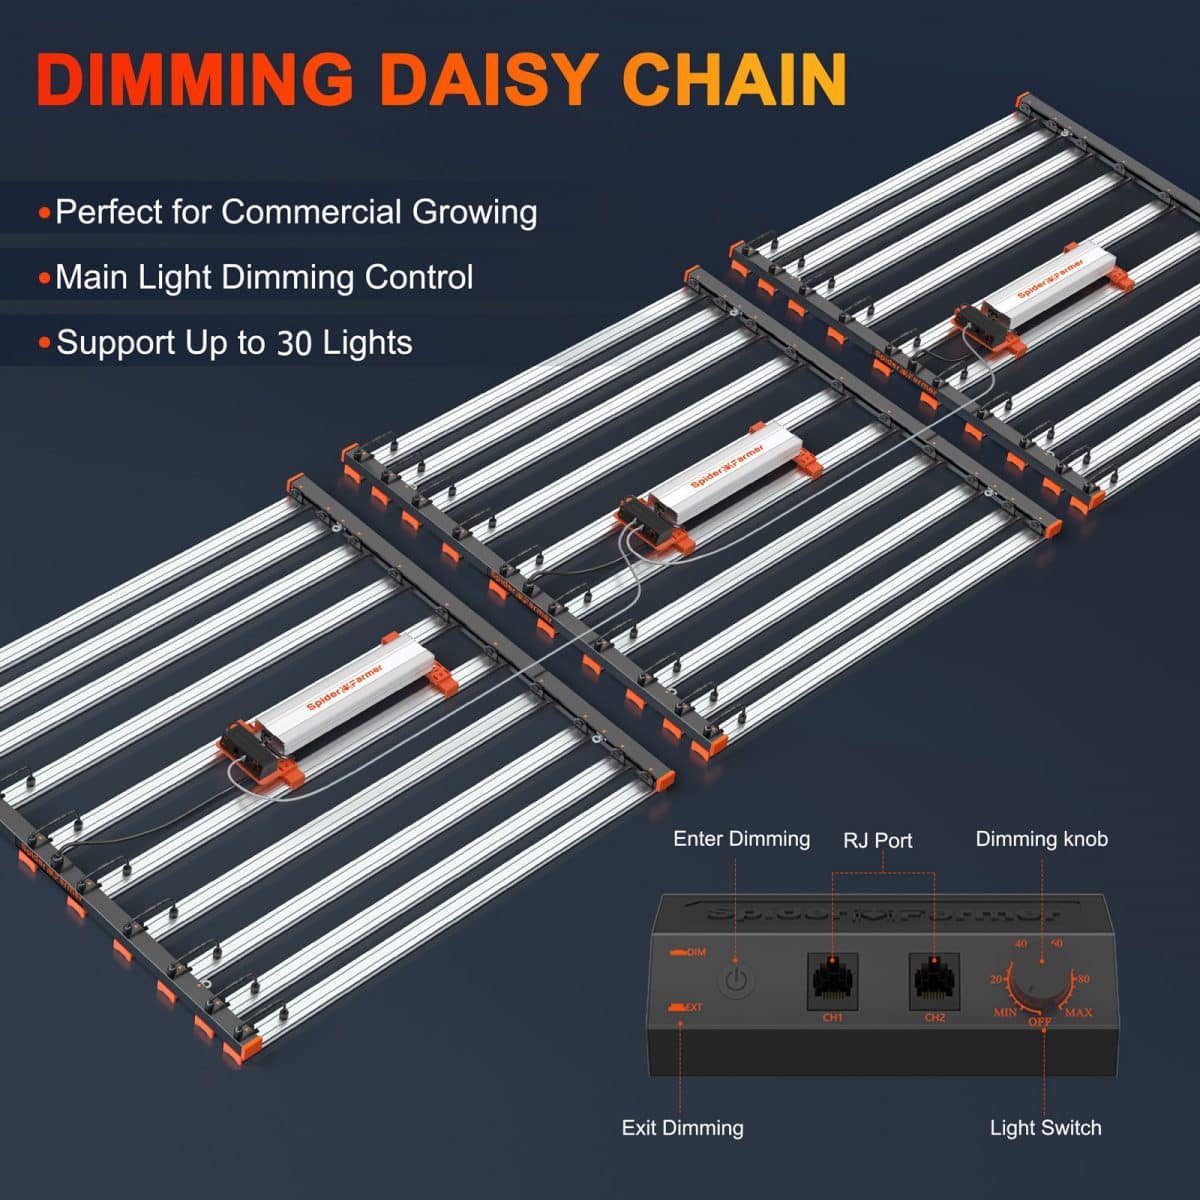 SE1000W-LED-Dimming-daisy-chain